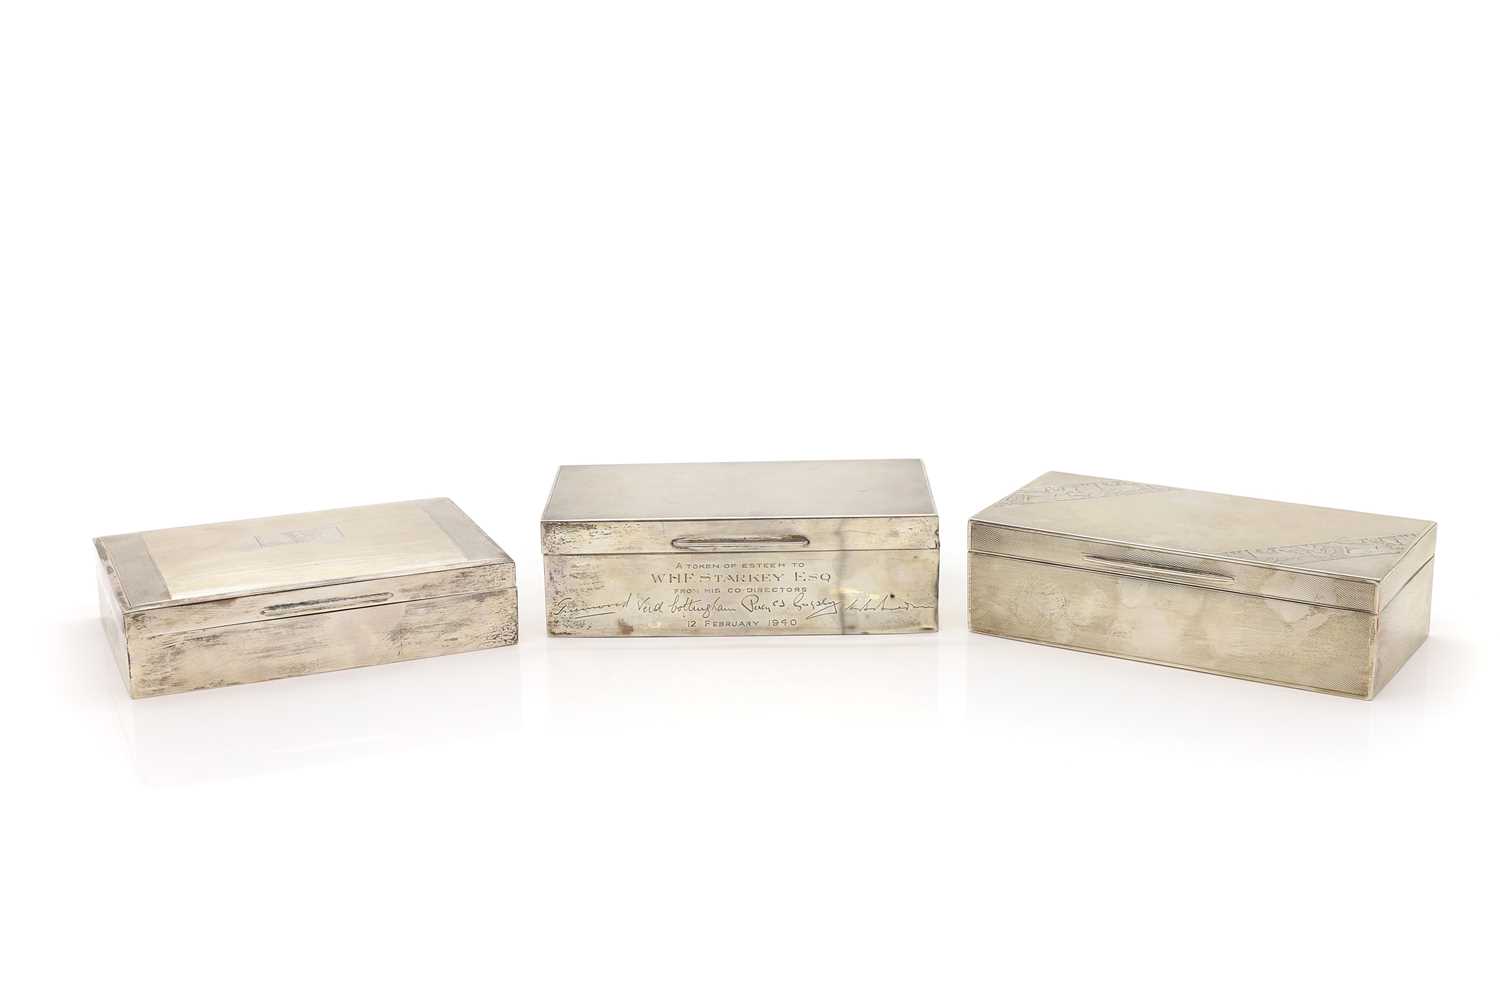 A group of three silver cigarette boxes